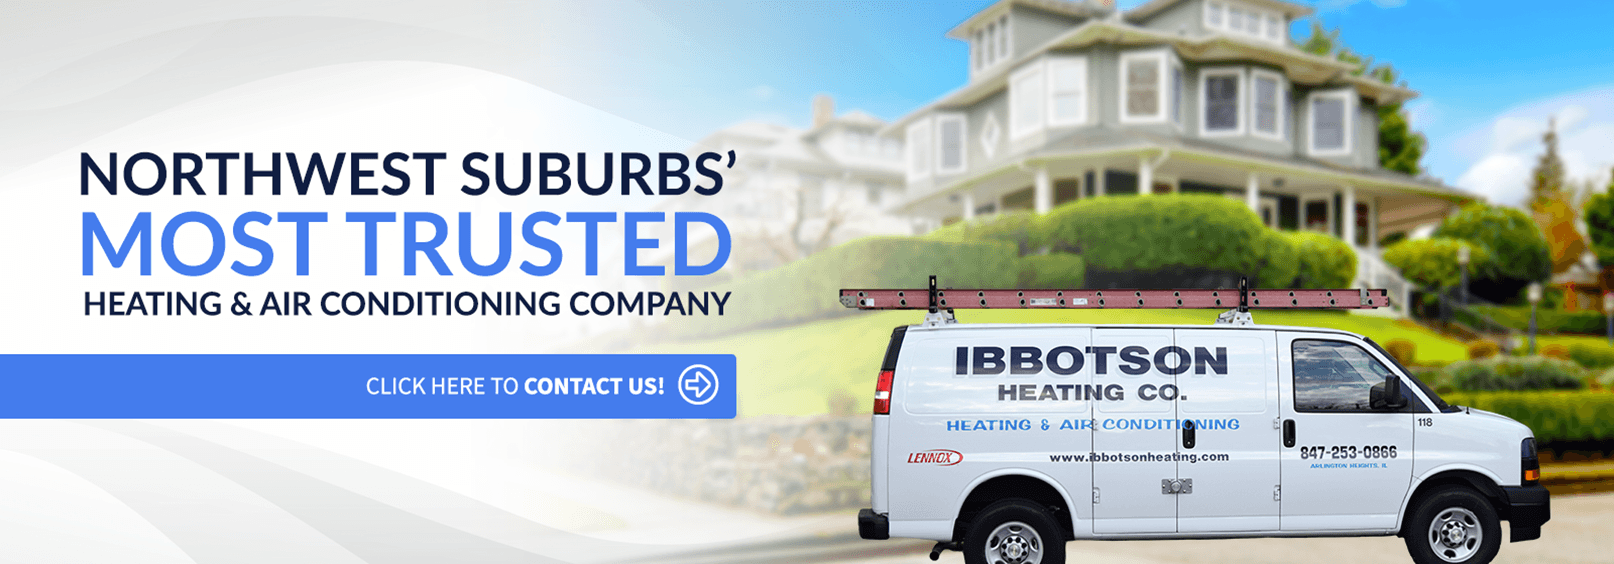 Ibbotson Heating & Air Conditioning Co - Northwest Suburbs Most Trusted